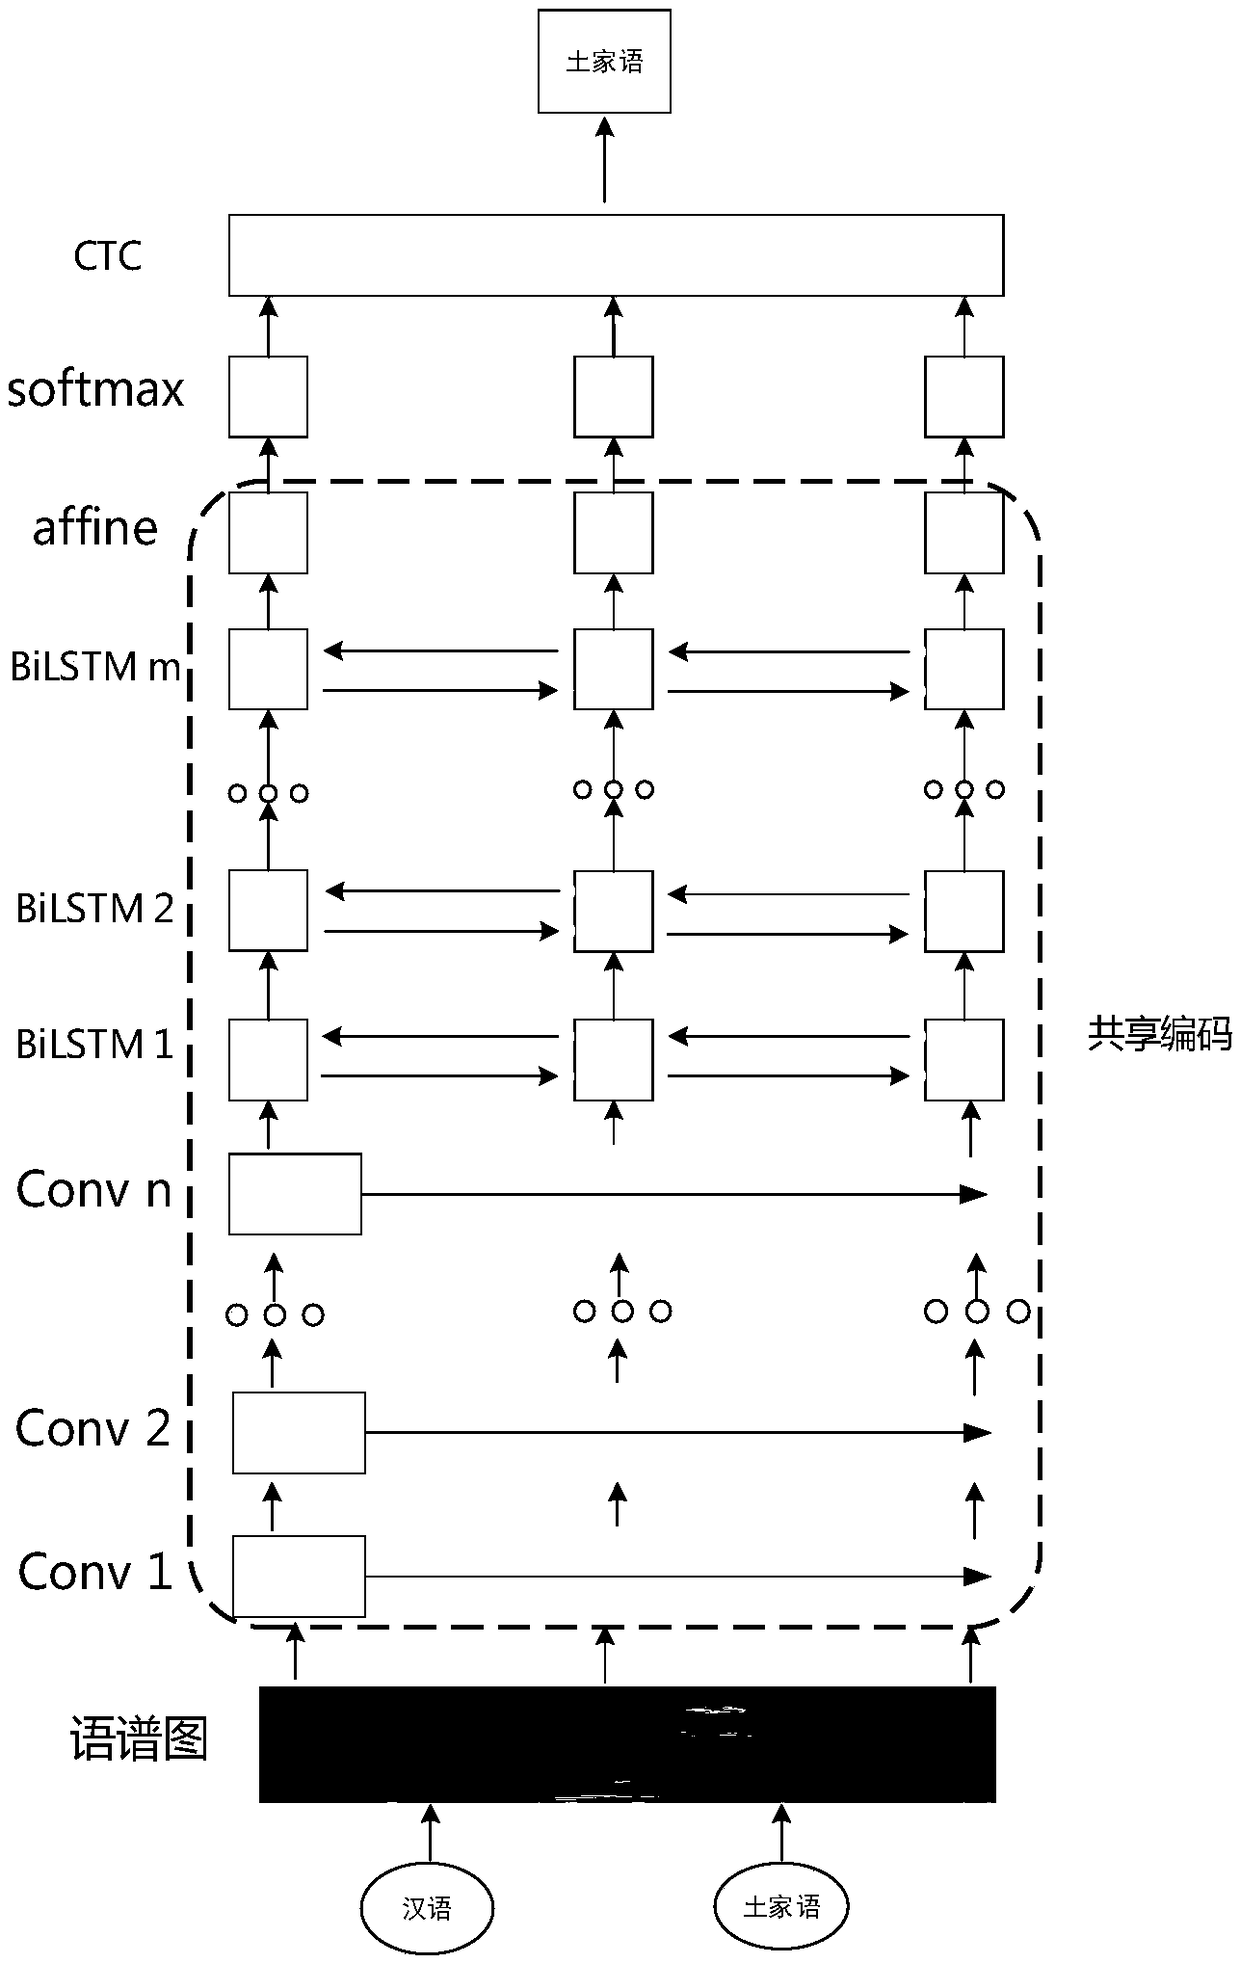 Cross-language end-to-end speech recognition method for low resource Tujia language